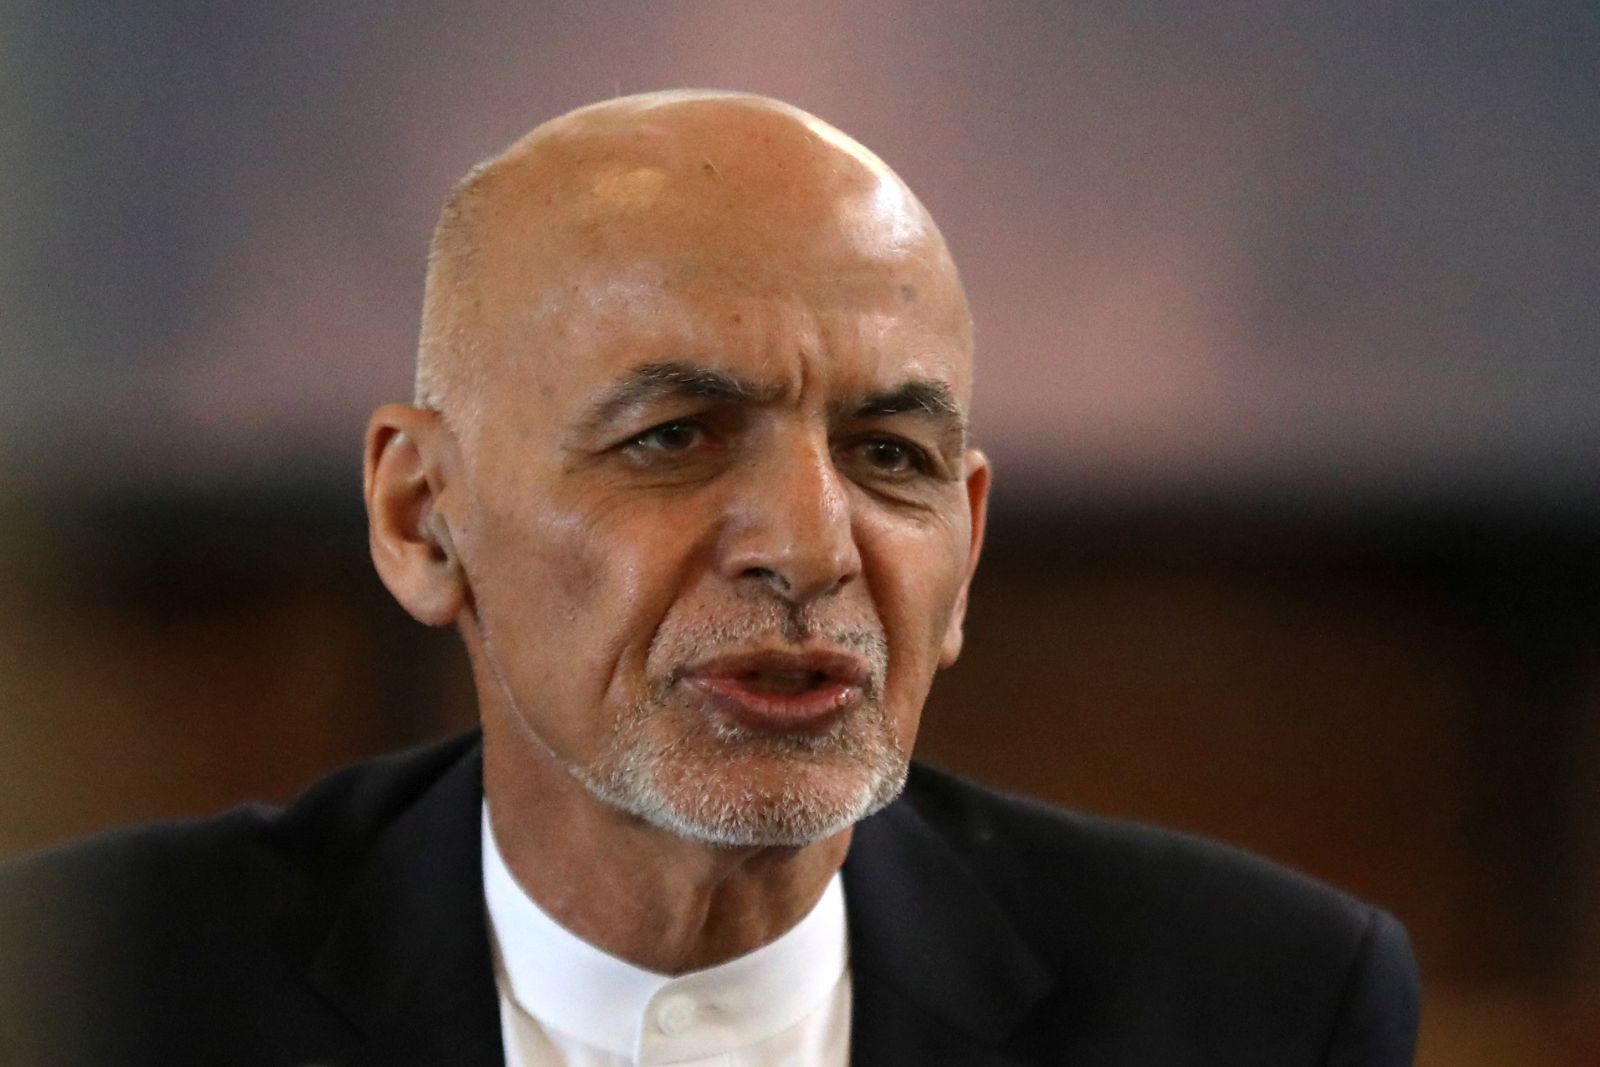 epa09415350 (FILE) - Afghanistan President Ashraf Ghani speaks during celebrations to mark the Persian New Year Nowruz at the presidential palace in Kabul, Afghanistan, 21 March 2021 (reissued 15 August 2021). According to a senior Afghan Interior Ministry official, Ashraf Ghani has left the country, as Taliban militants have reached the outskirts of Kabul. The insurgents said they will not enter the capital by force and are negotiating a peaceful transition of power.  EPA/HEDAYATULLAH AMID